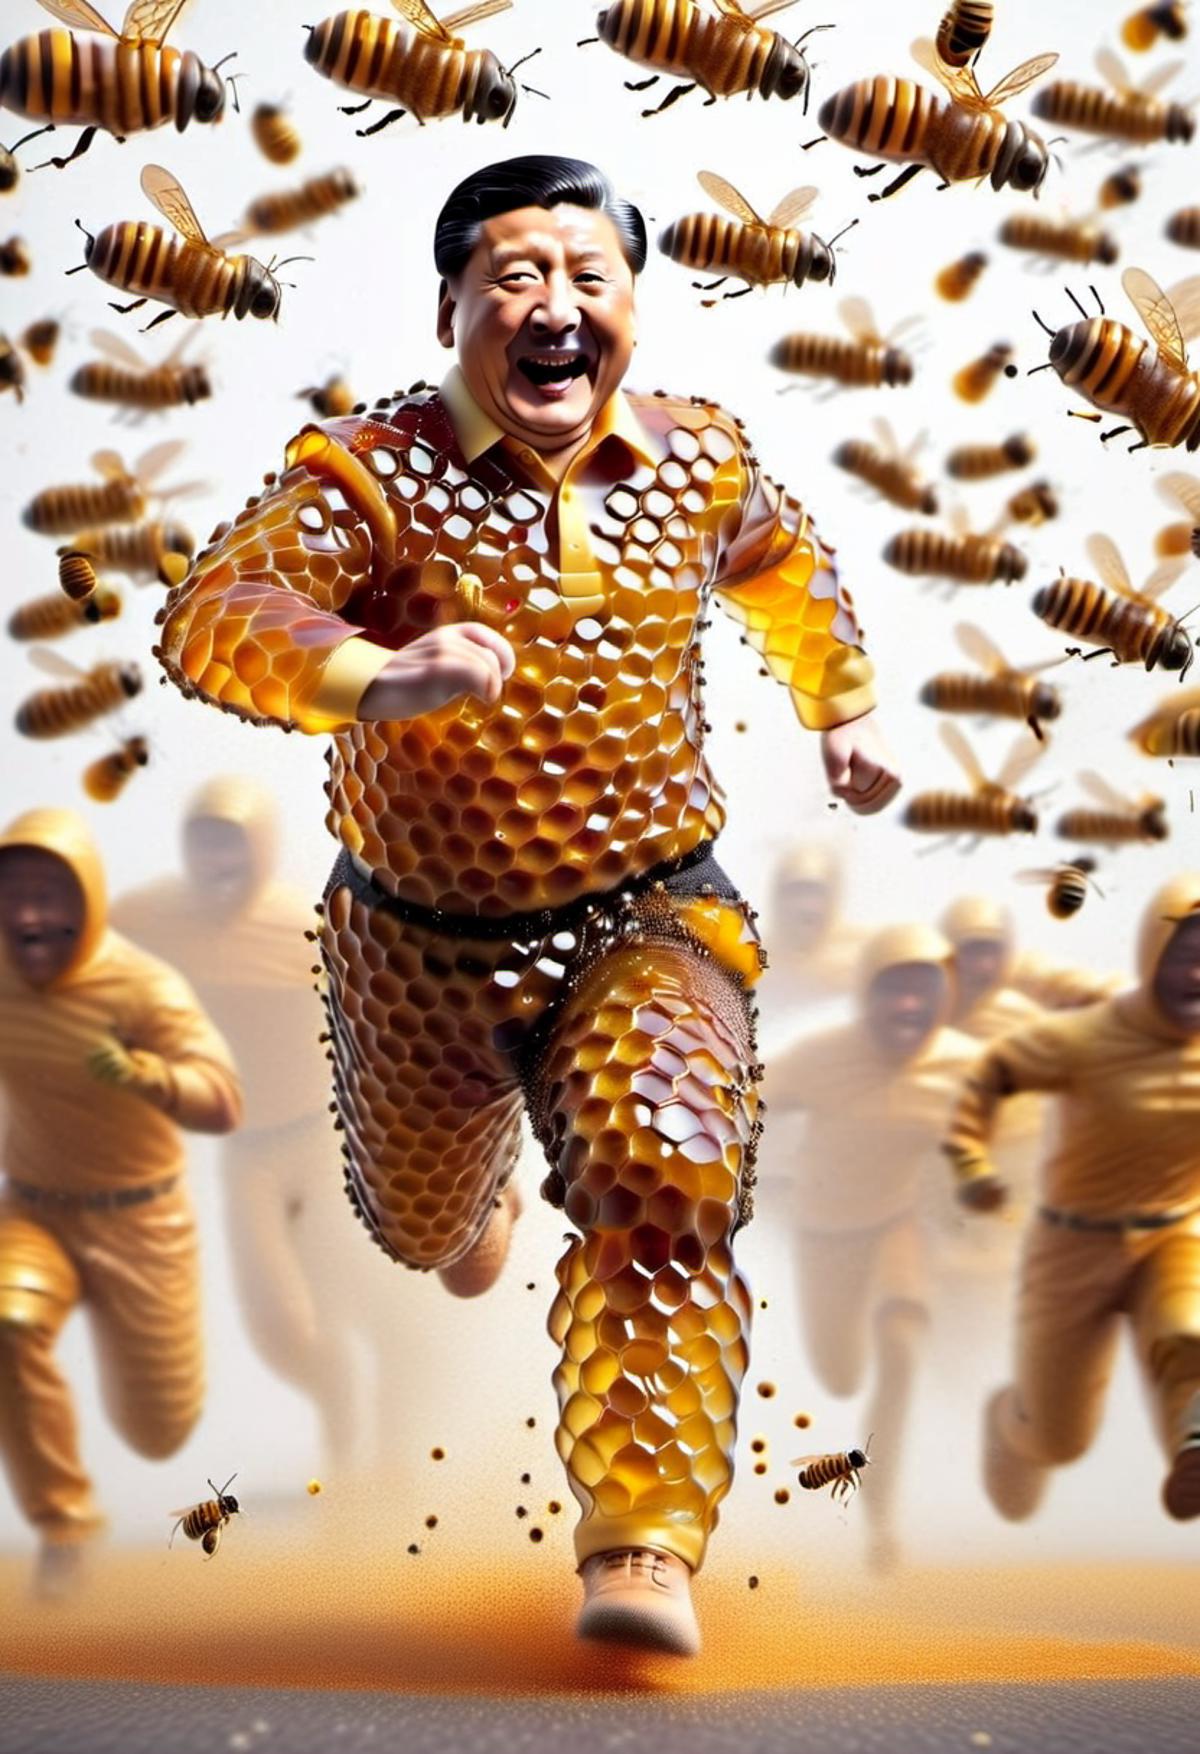 Action shot of Xi Jinping made of dvr-honey, carrying teddy bear made of dvr-honey, running away from bees.  <lora:HoneySt...